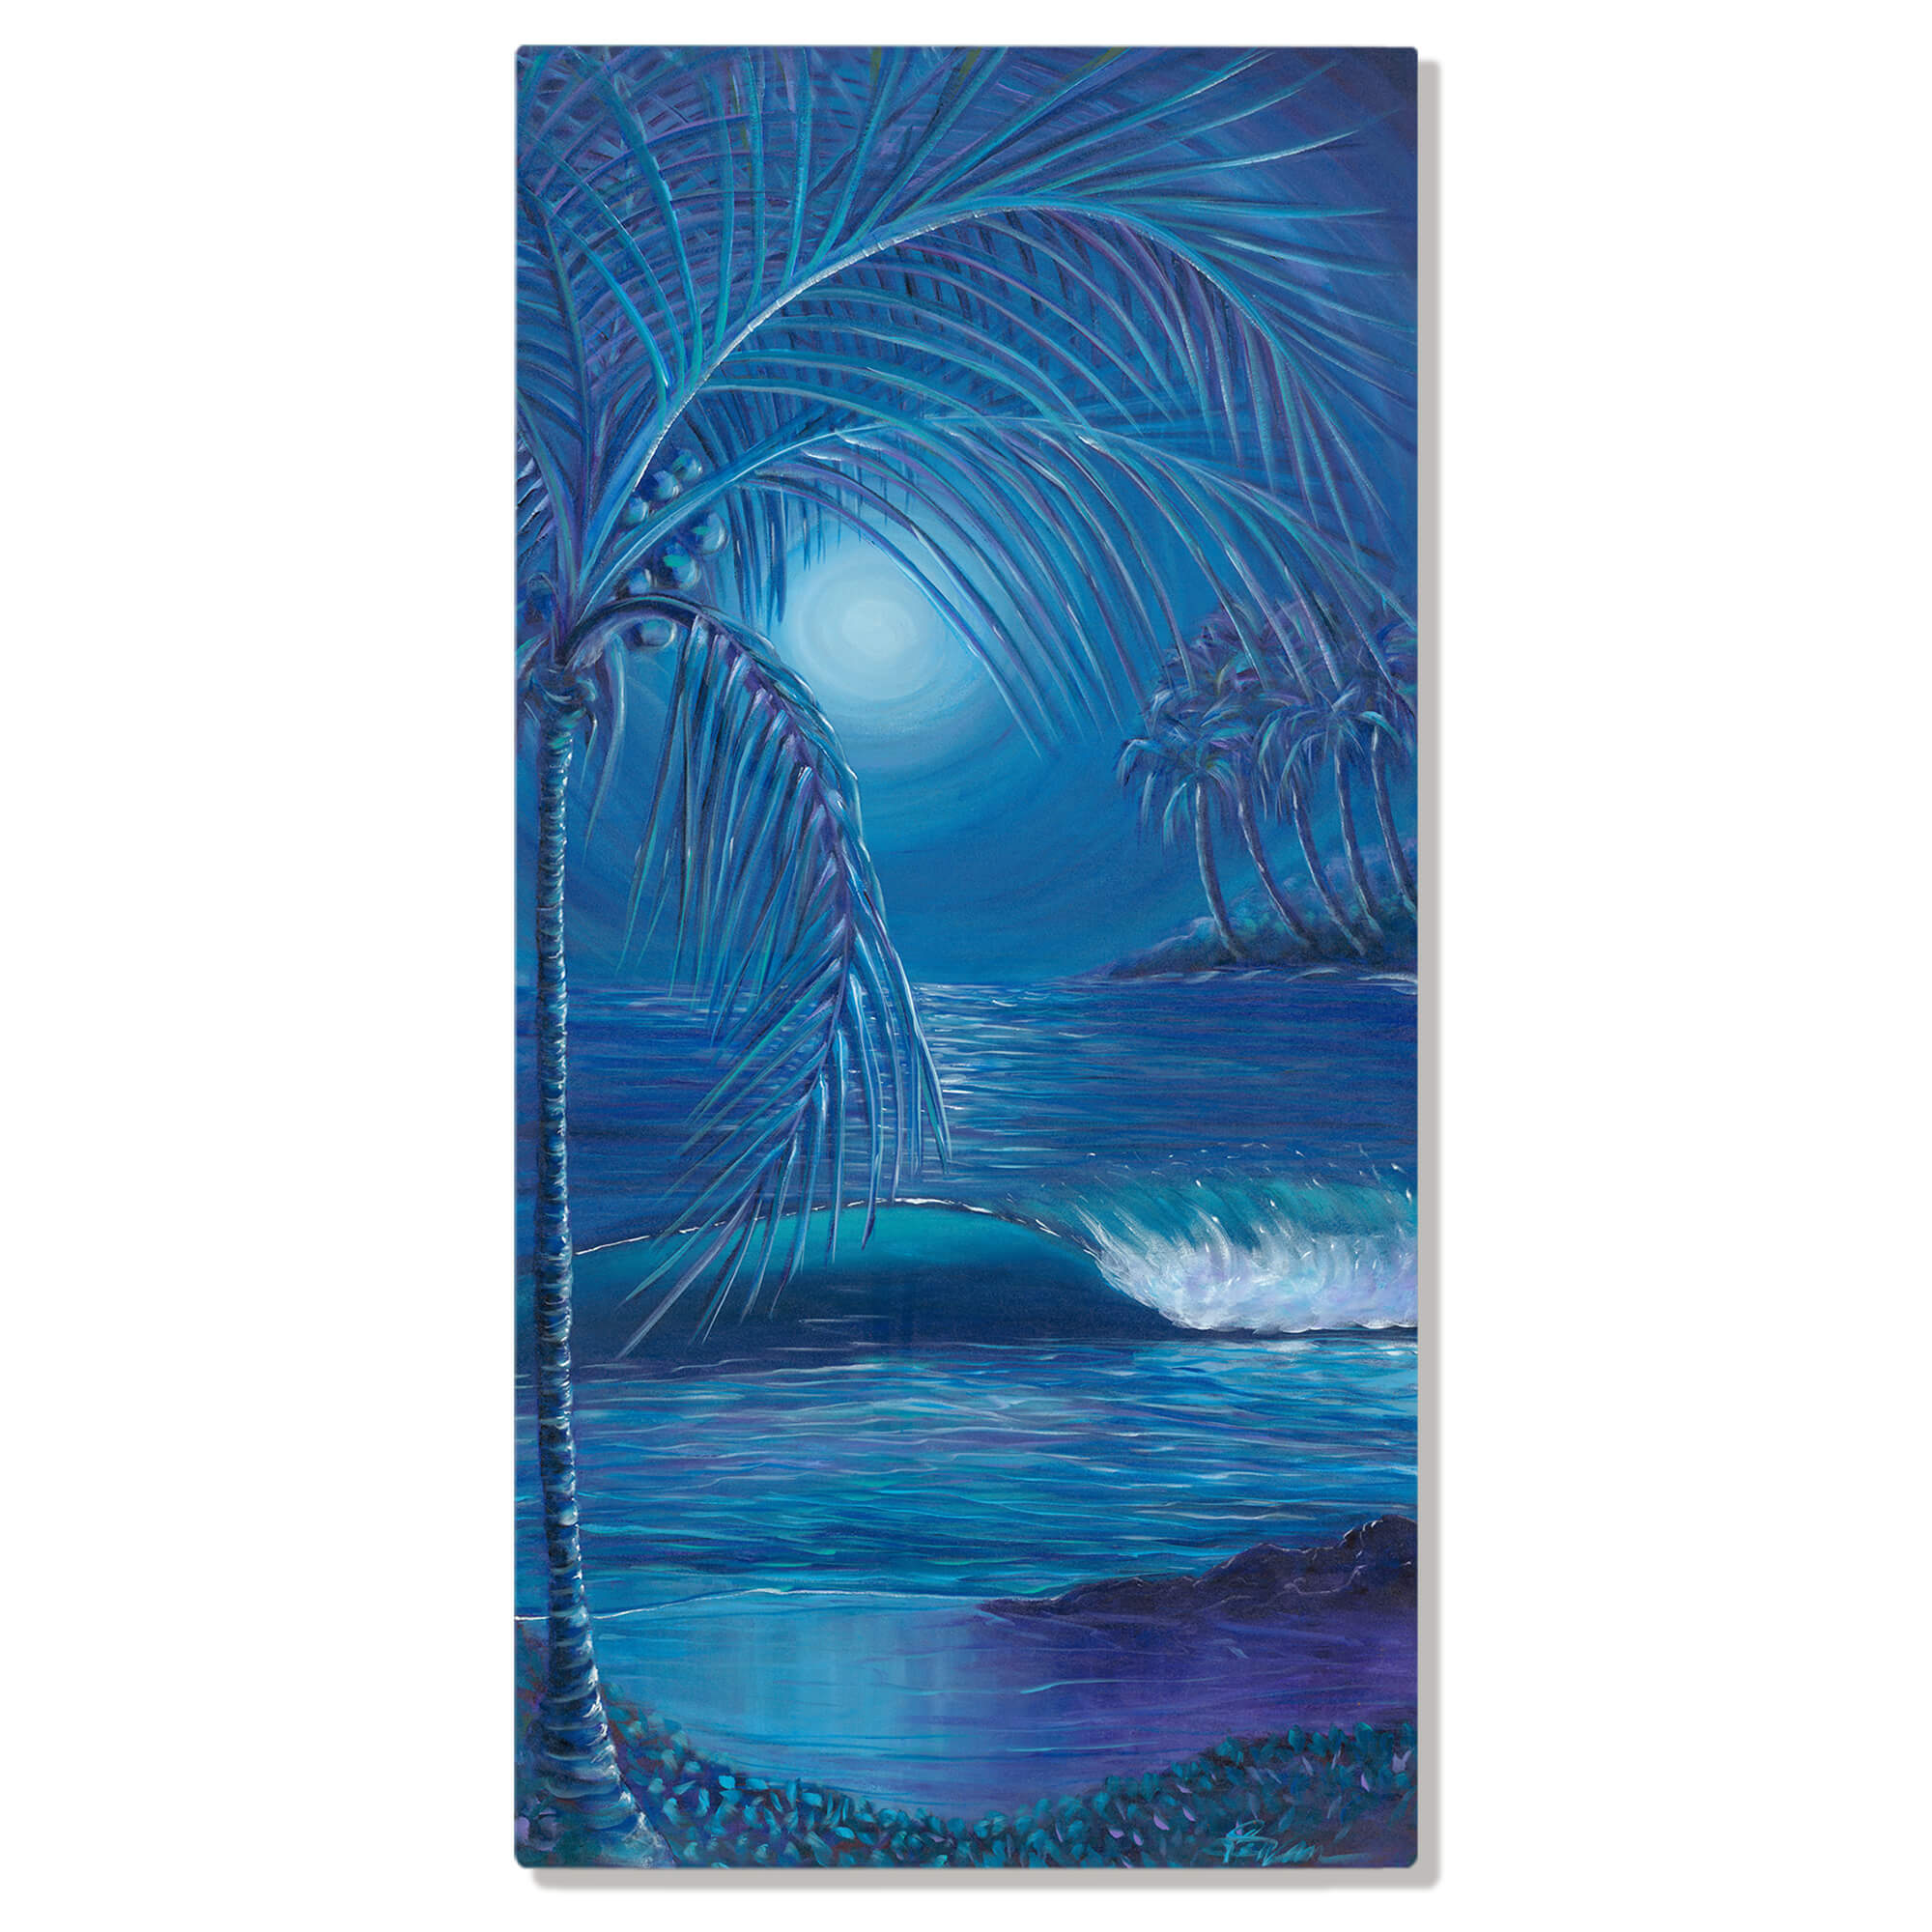 Metal art print featuring towering  palm trees on the beach in the shore by hawaii artist Suzzane MacAdam